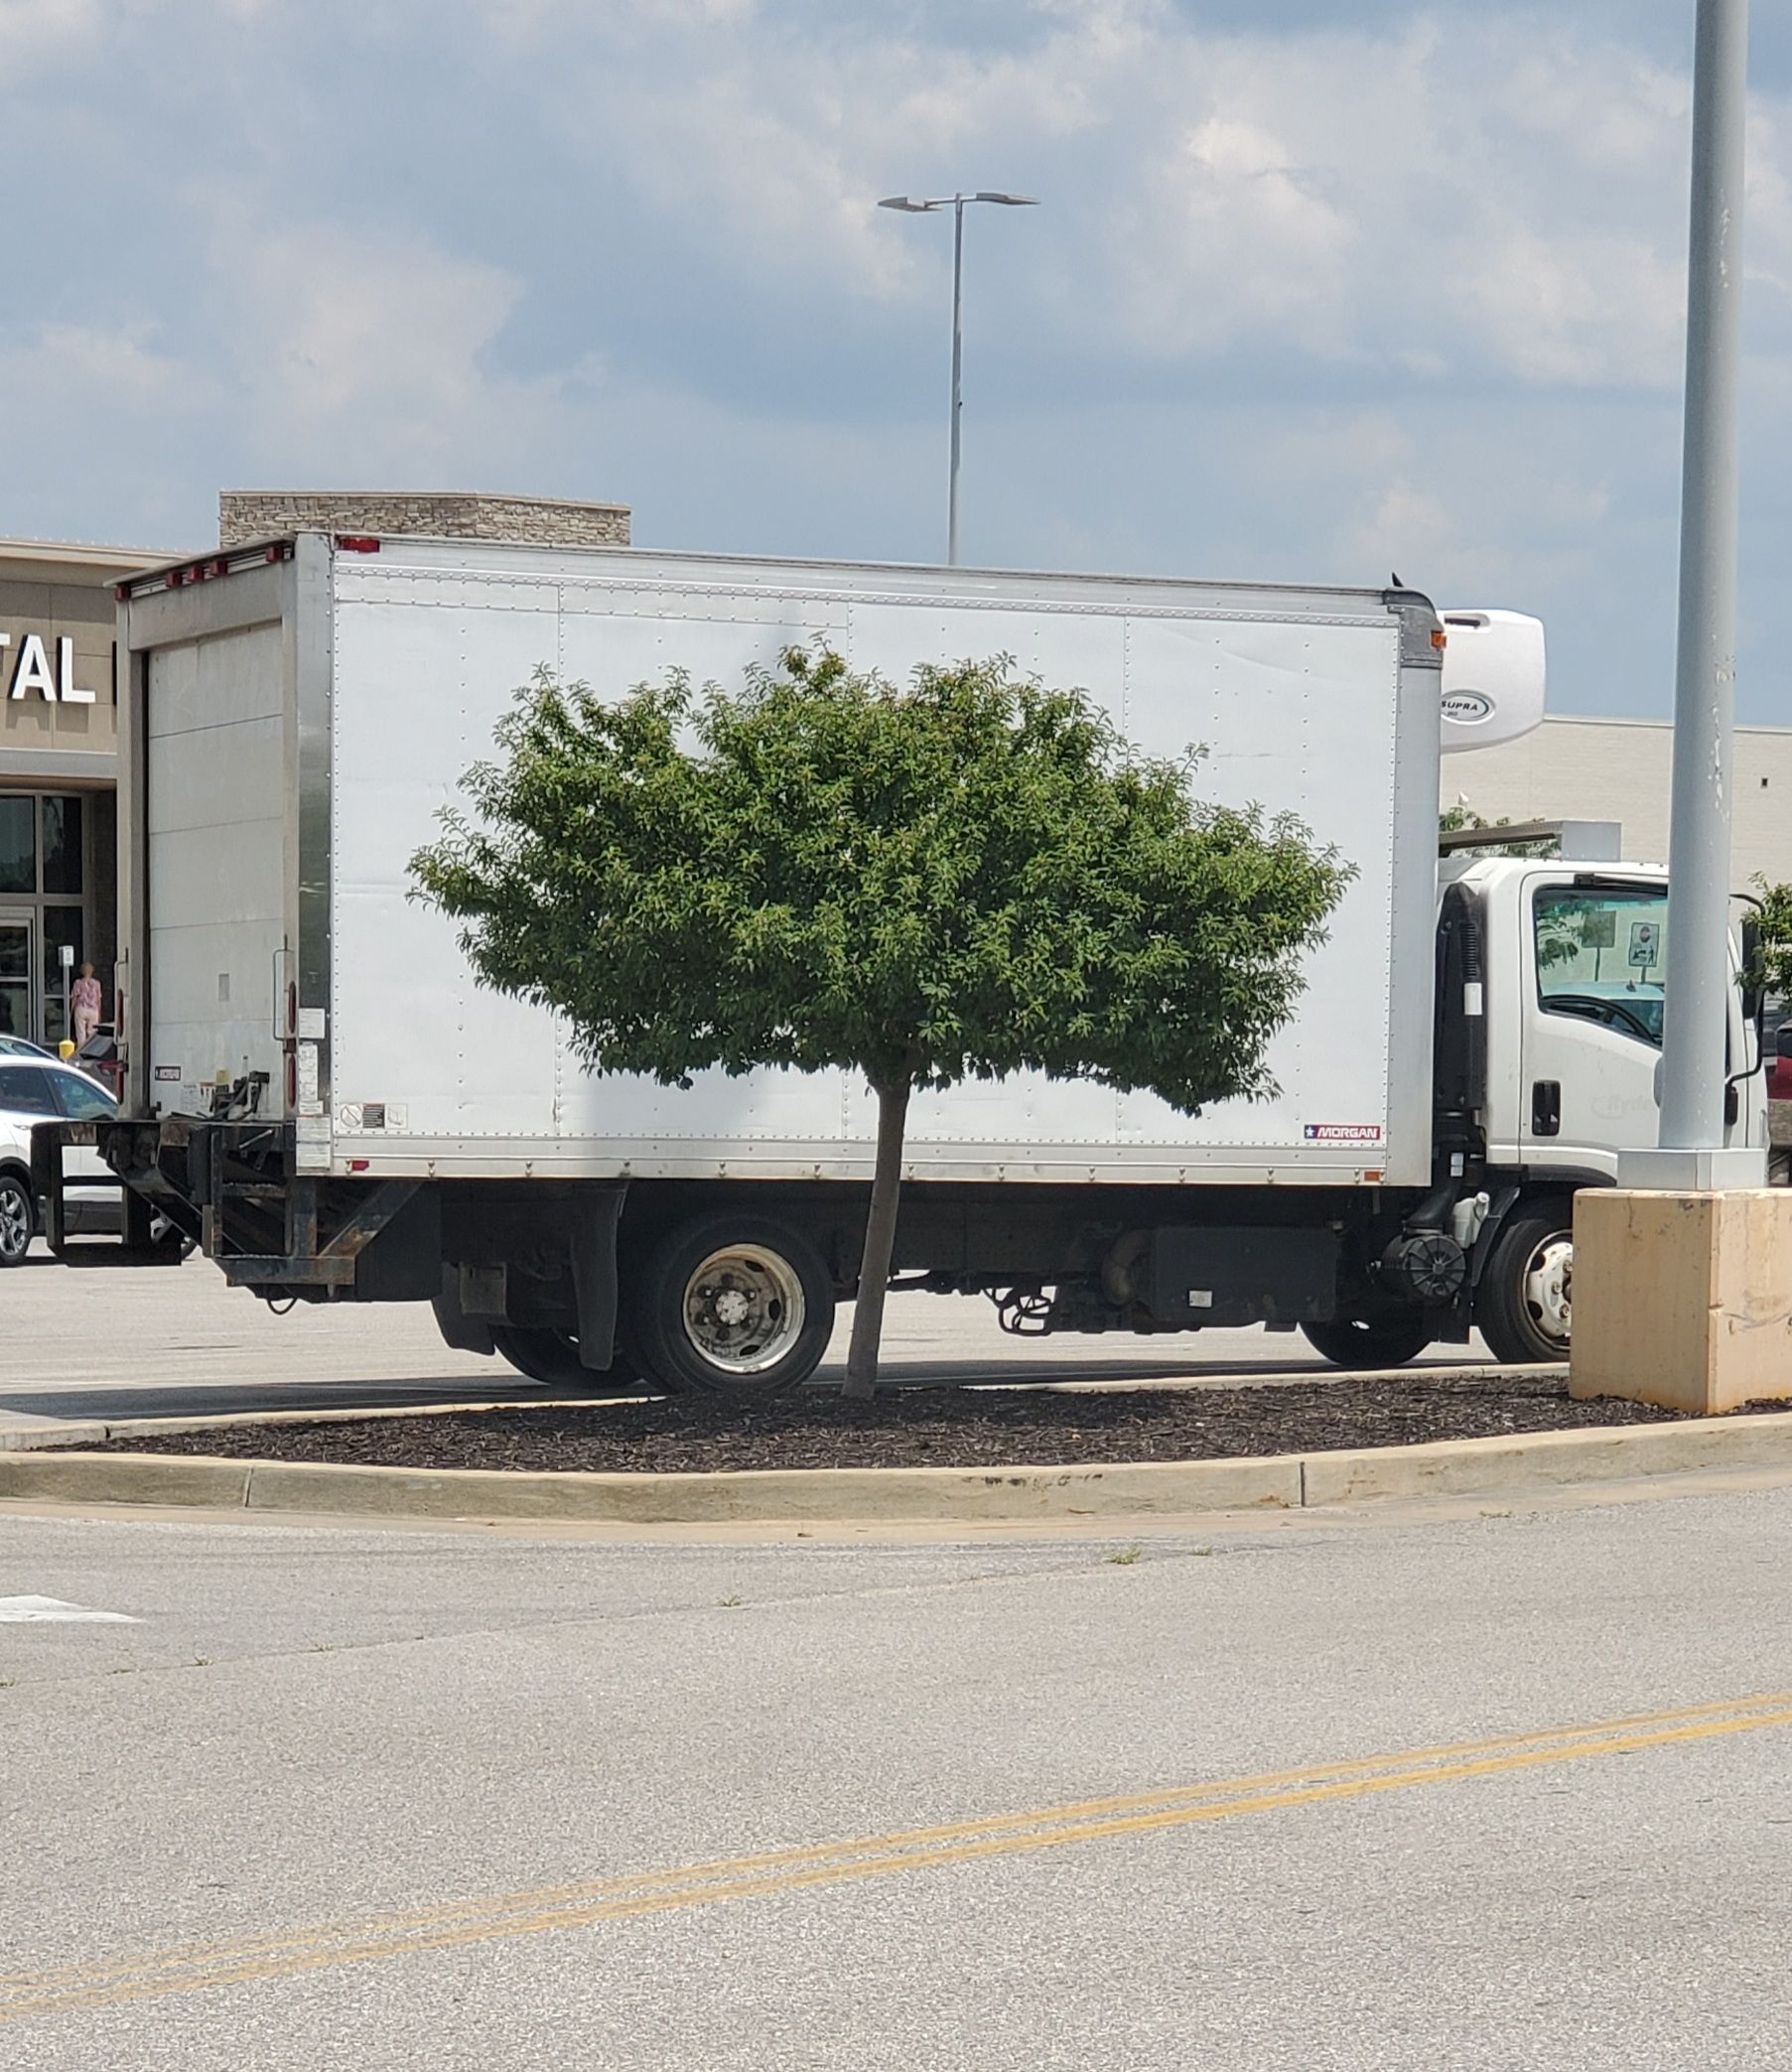 At first glance I thought this truck had a cool realistic tree painted on it.